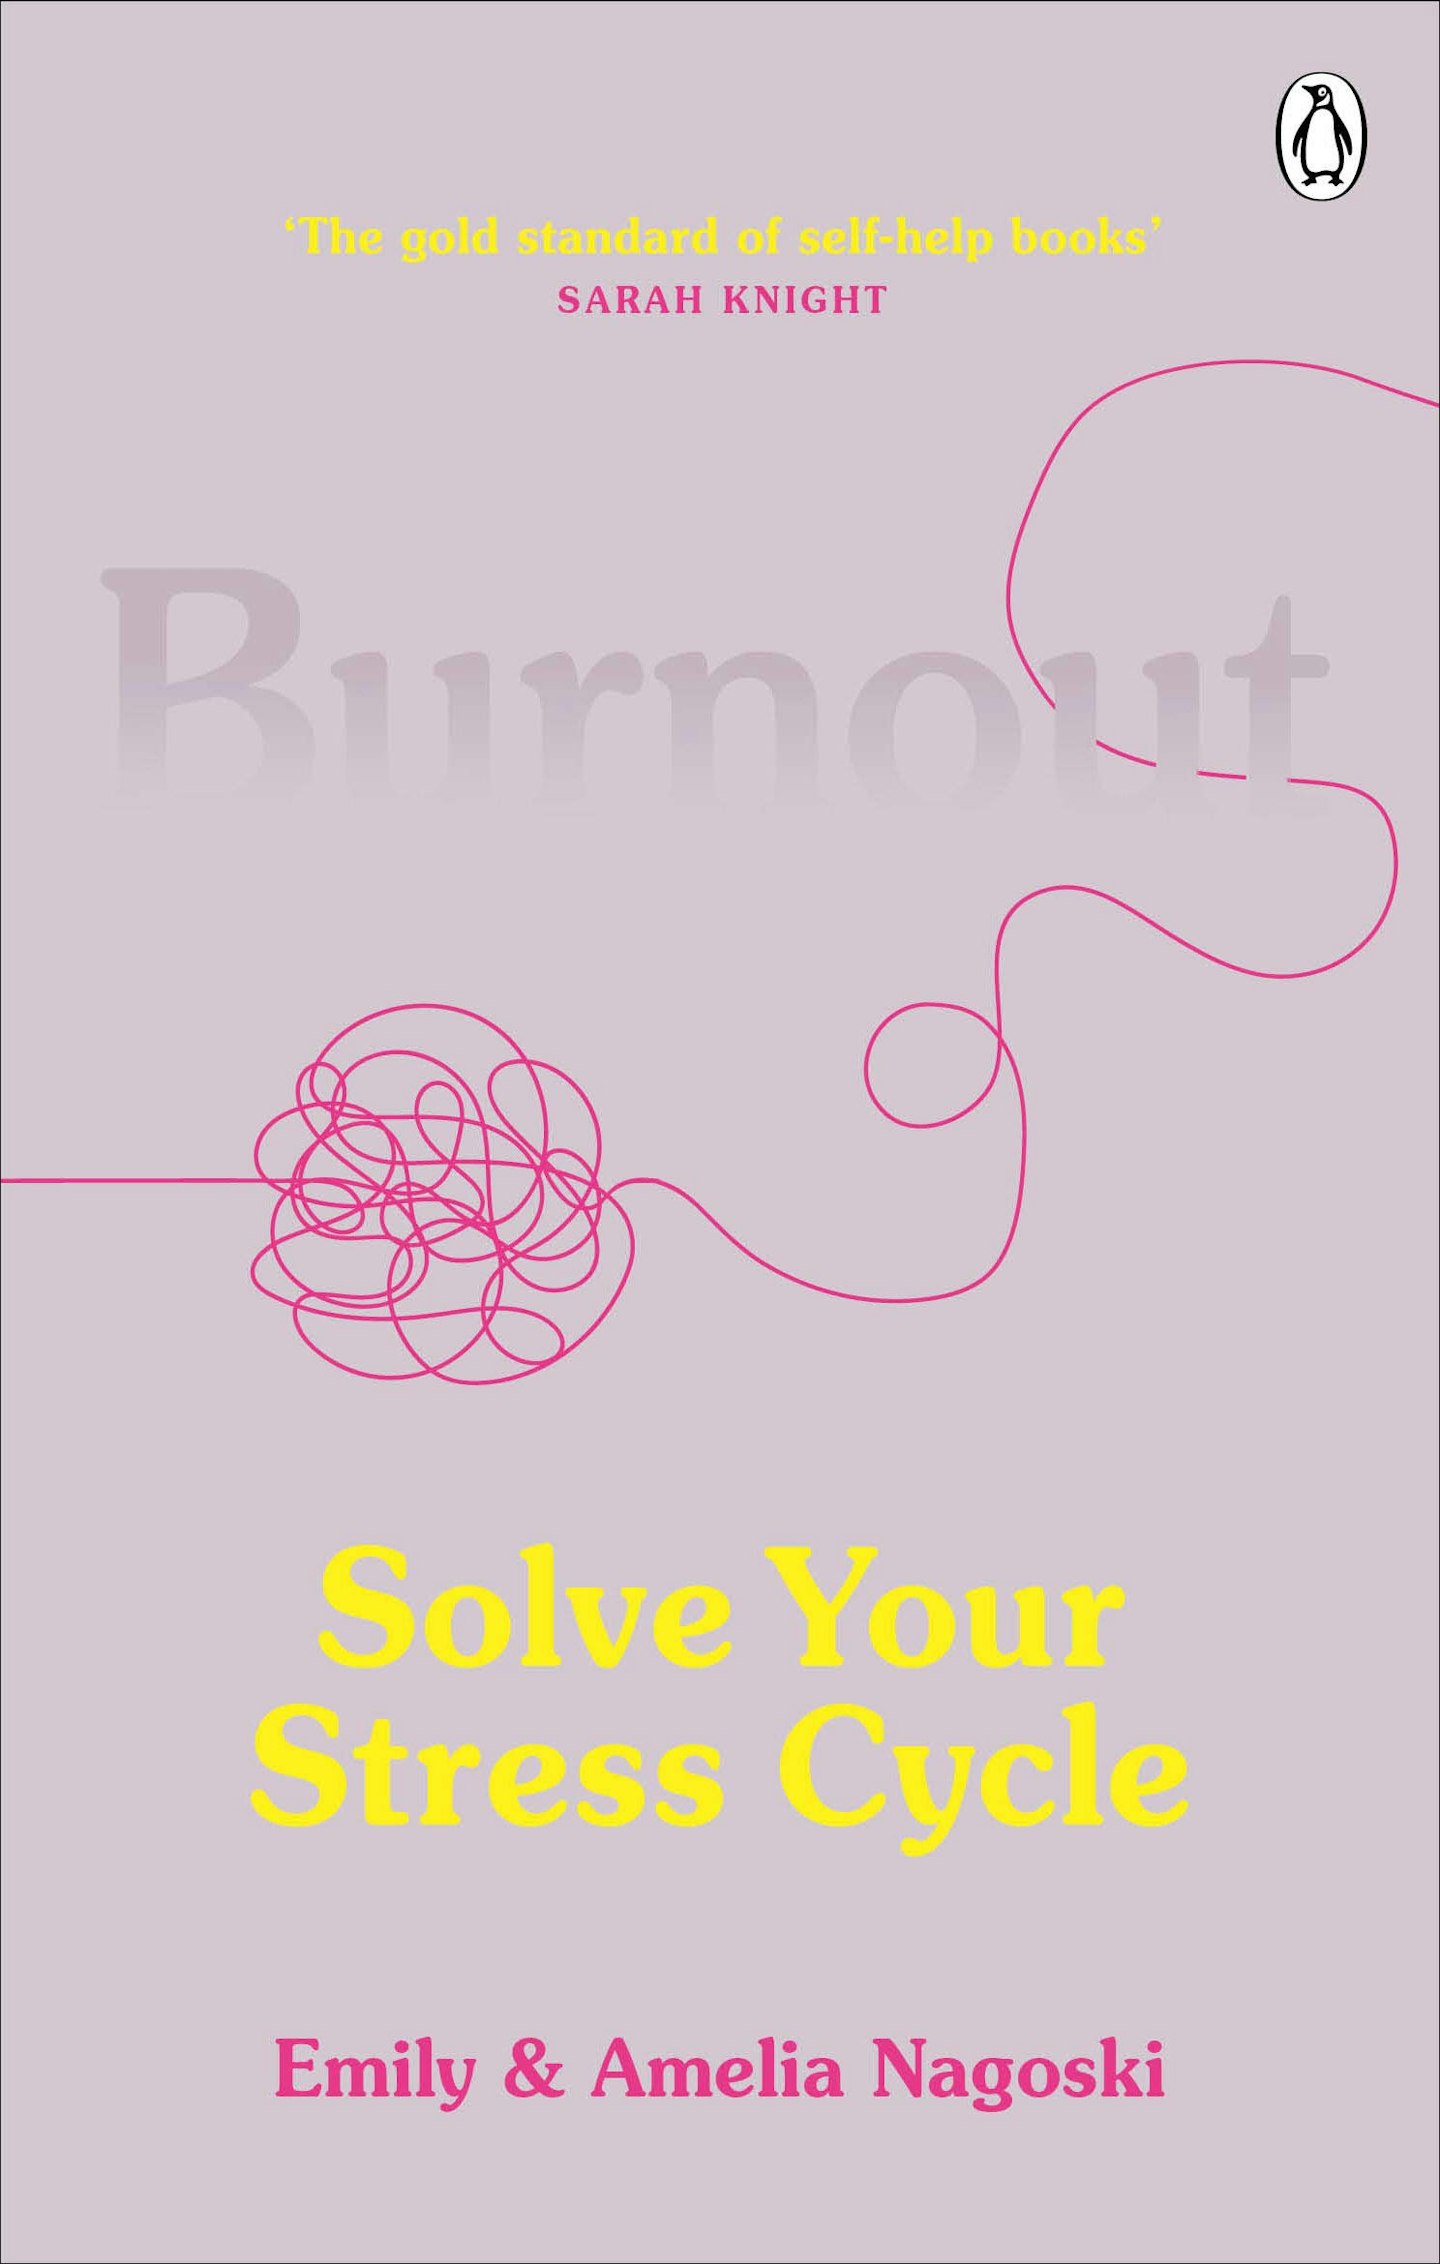 Burnout: Solve Your Stress Cycle by Sarah Knight